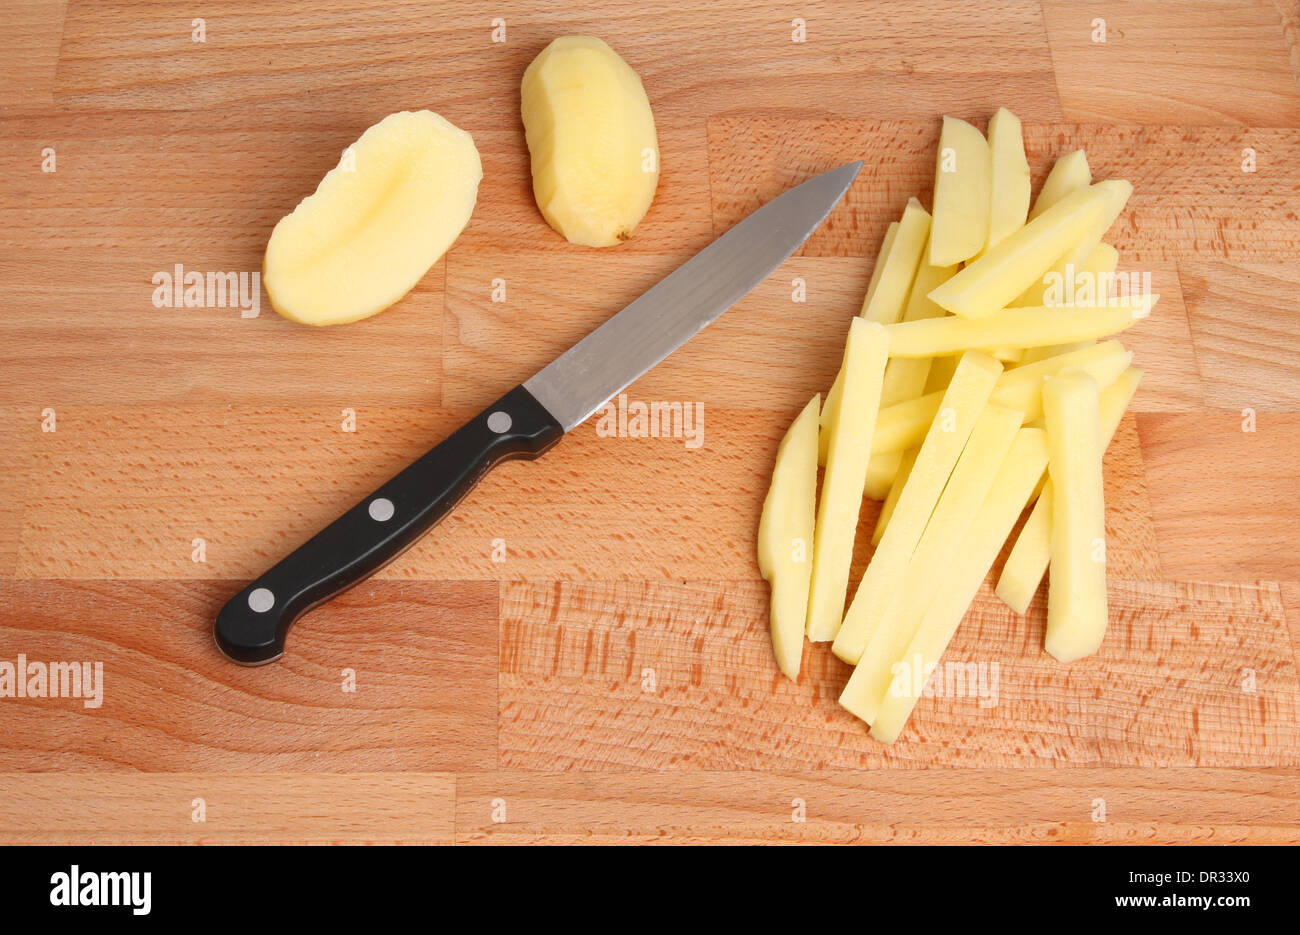 https://c8.alamy.com/comp/DR33X0/cutting-potato-chips-knife-and-potato-on-a-wooden-board-DR33X0.jpg